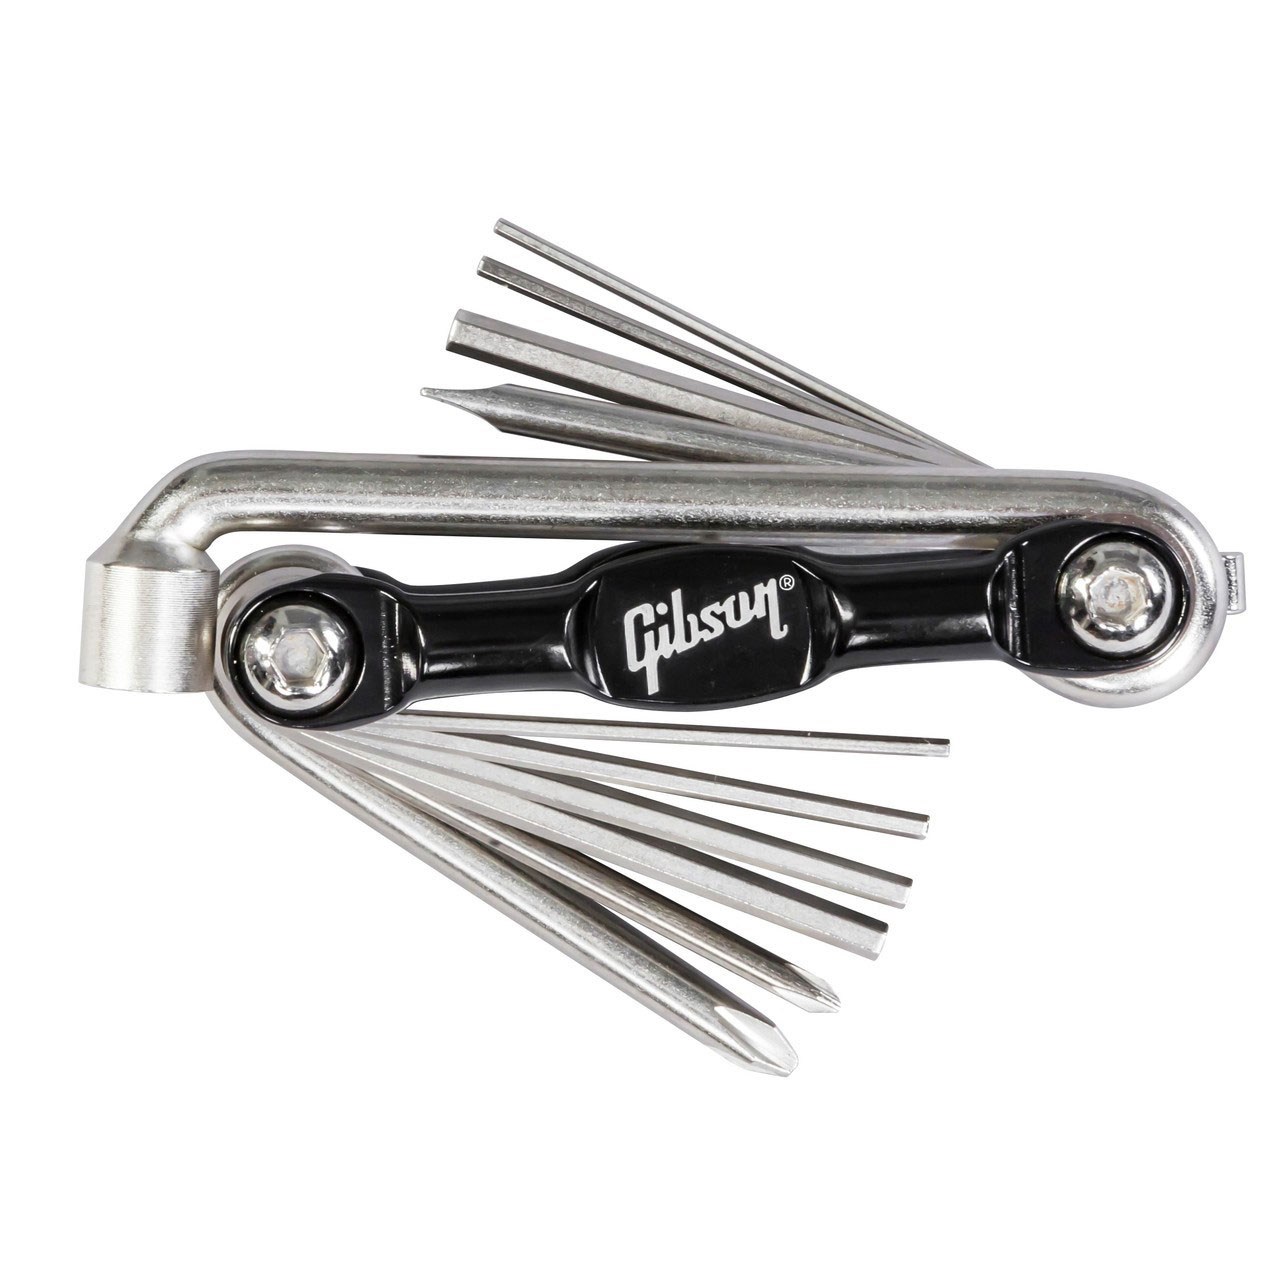 GIBSON ACCESSORIES INSTRUMENT CARE MULTI-TOOL